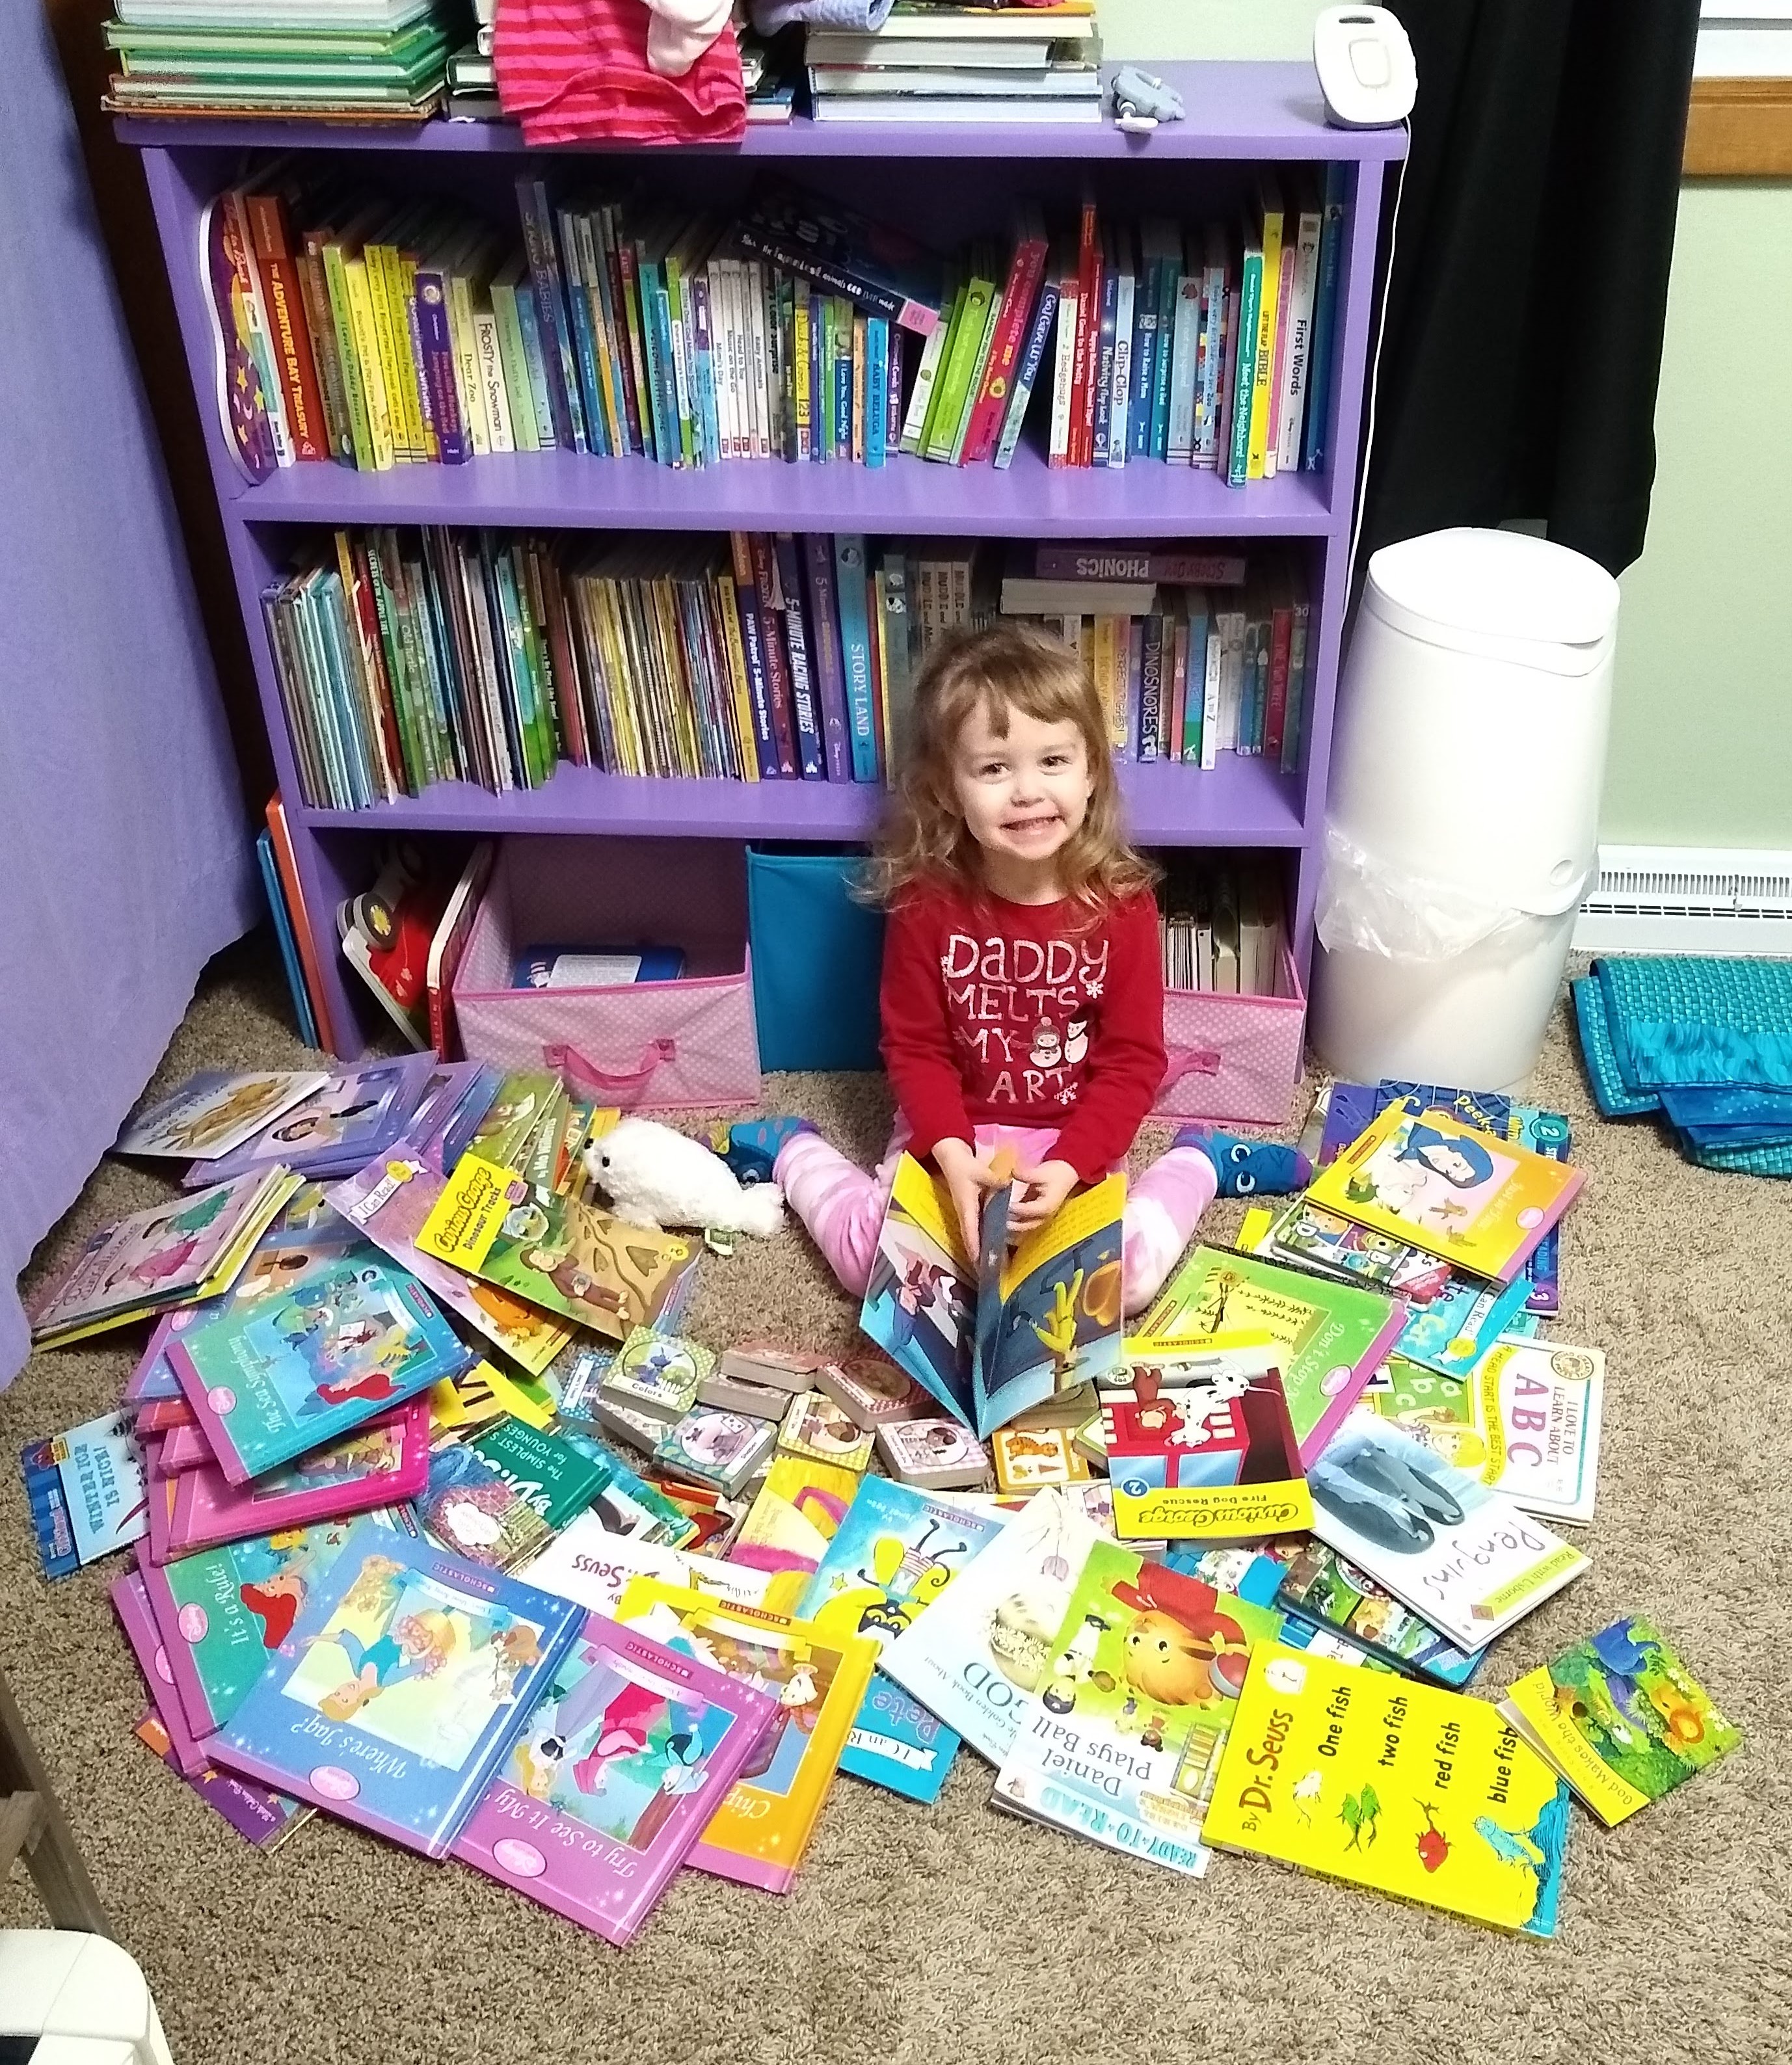 Child surrounded by picture books with shelf in background